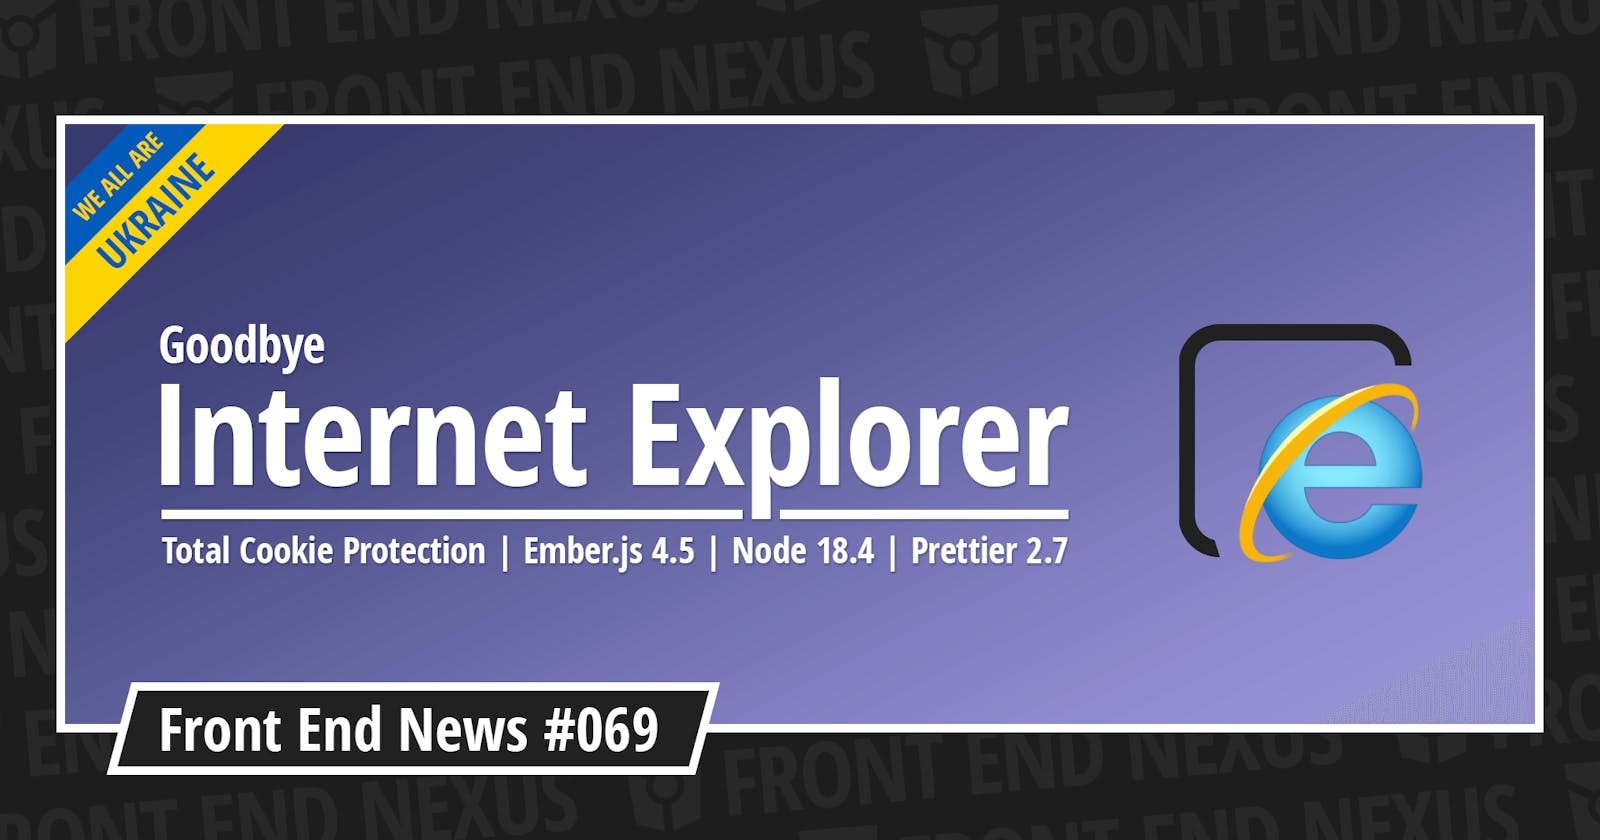 Goodbye Internet Explorer, Total Cookie Protection, Ember.js 4.5, Node 18.4, Prettier 2.7, and more | Front End News #069